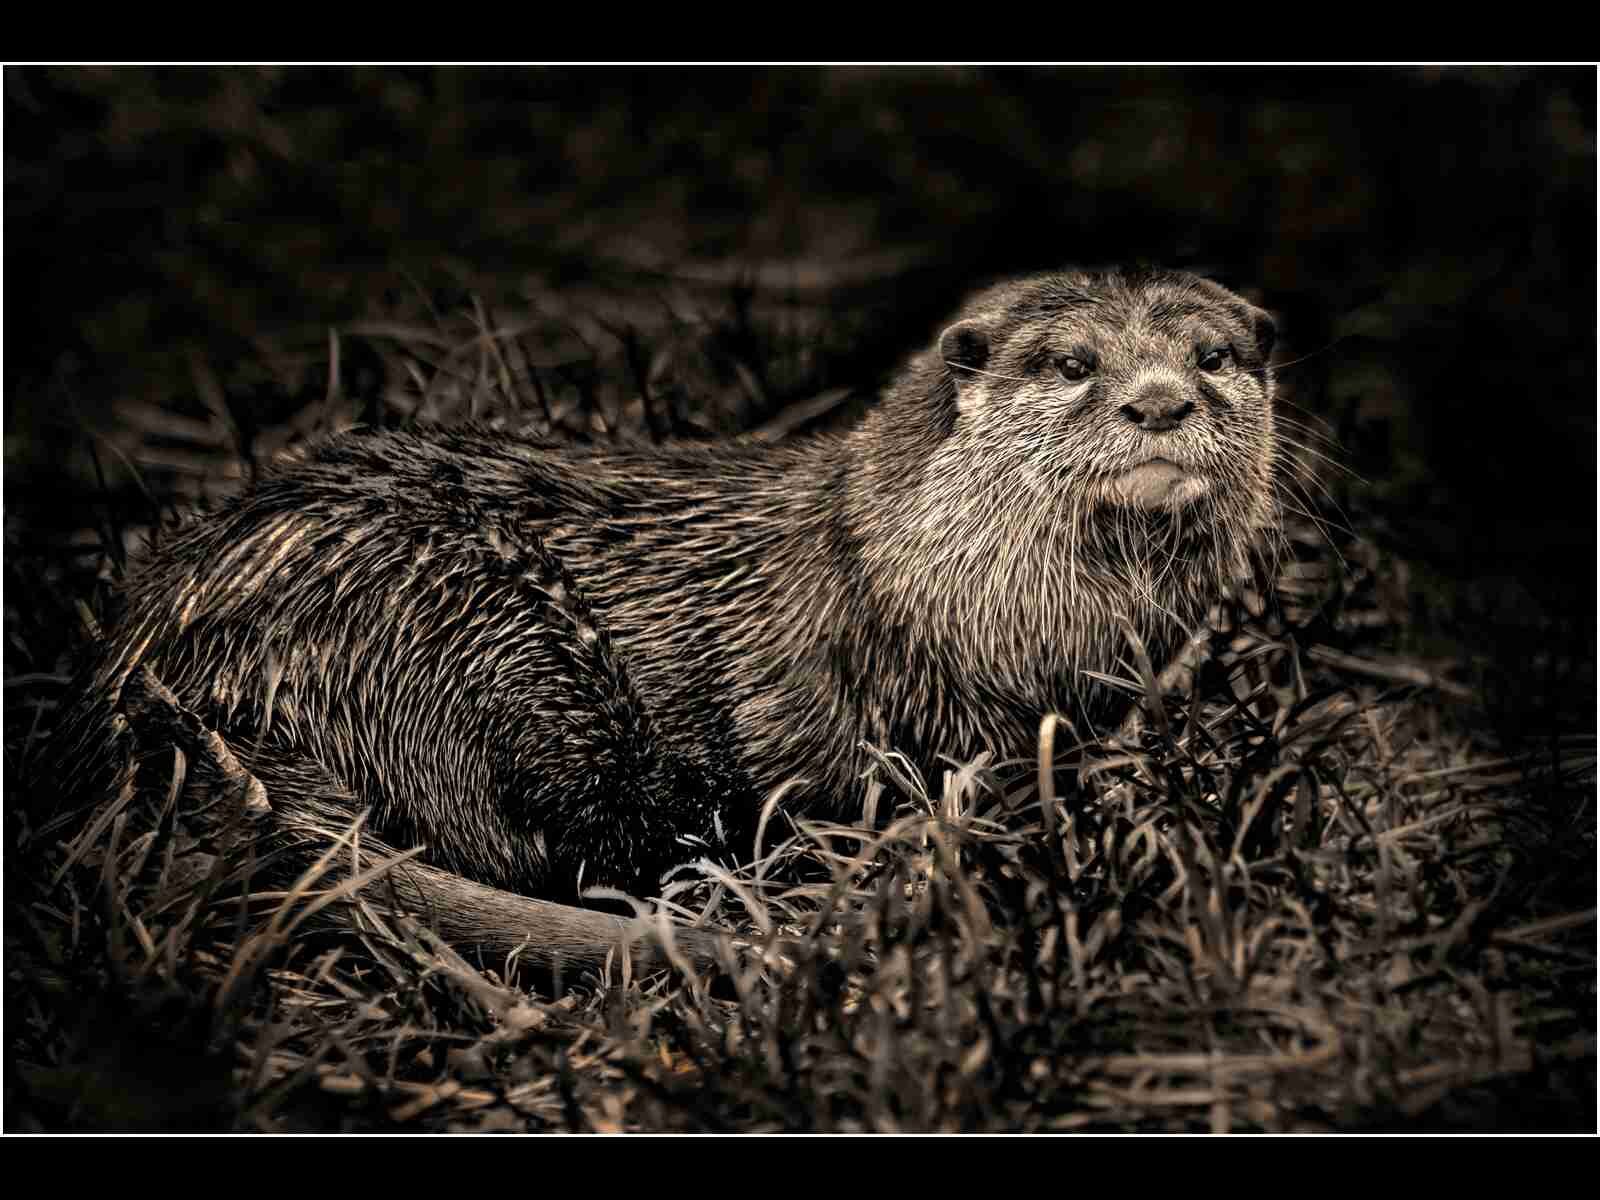 'Otter in the Undergrowth'